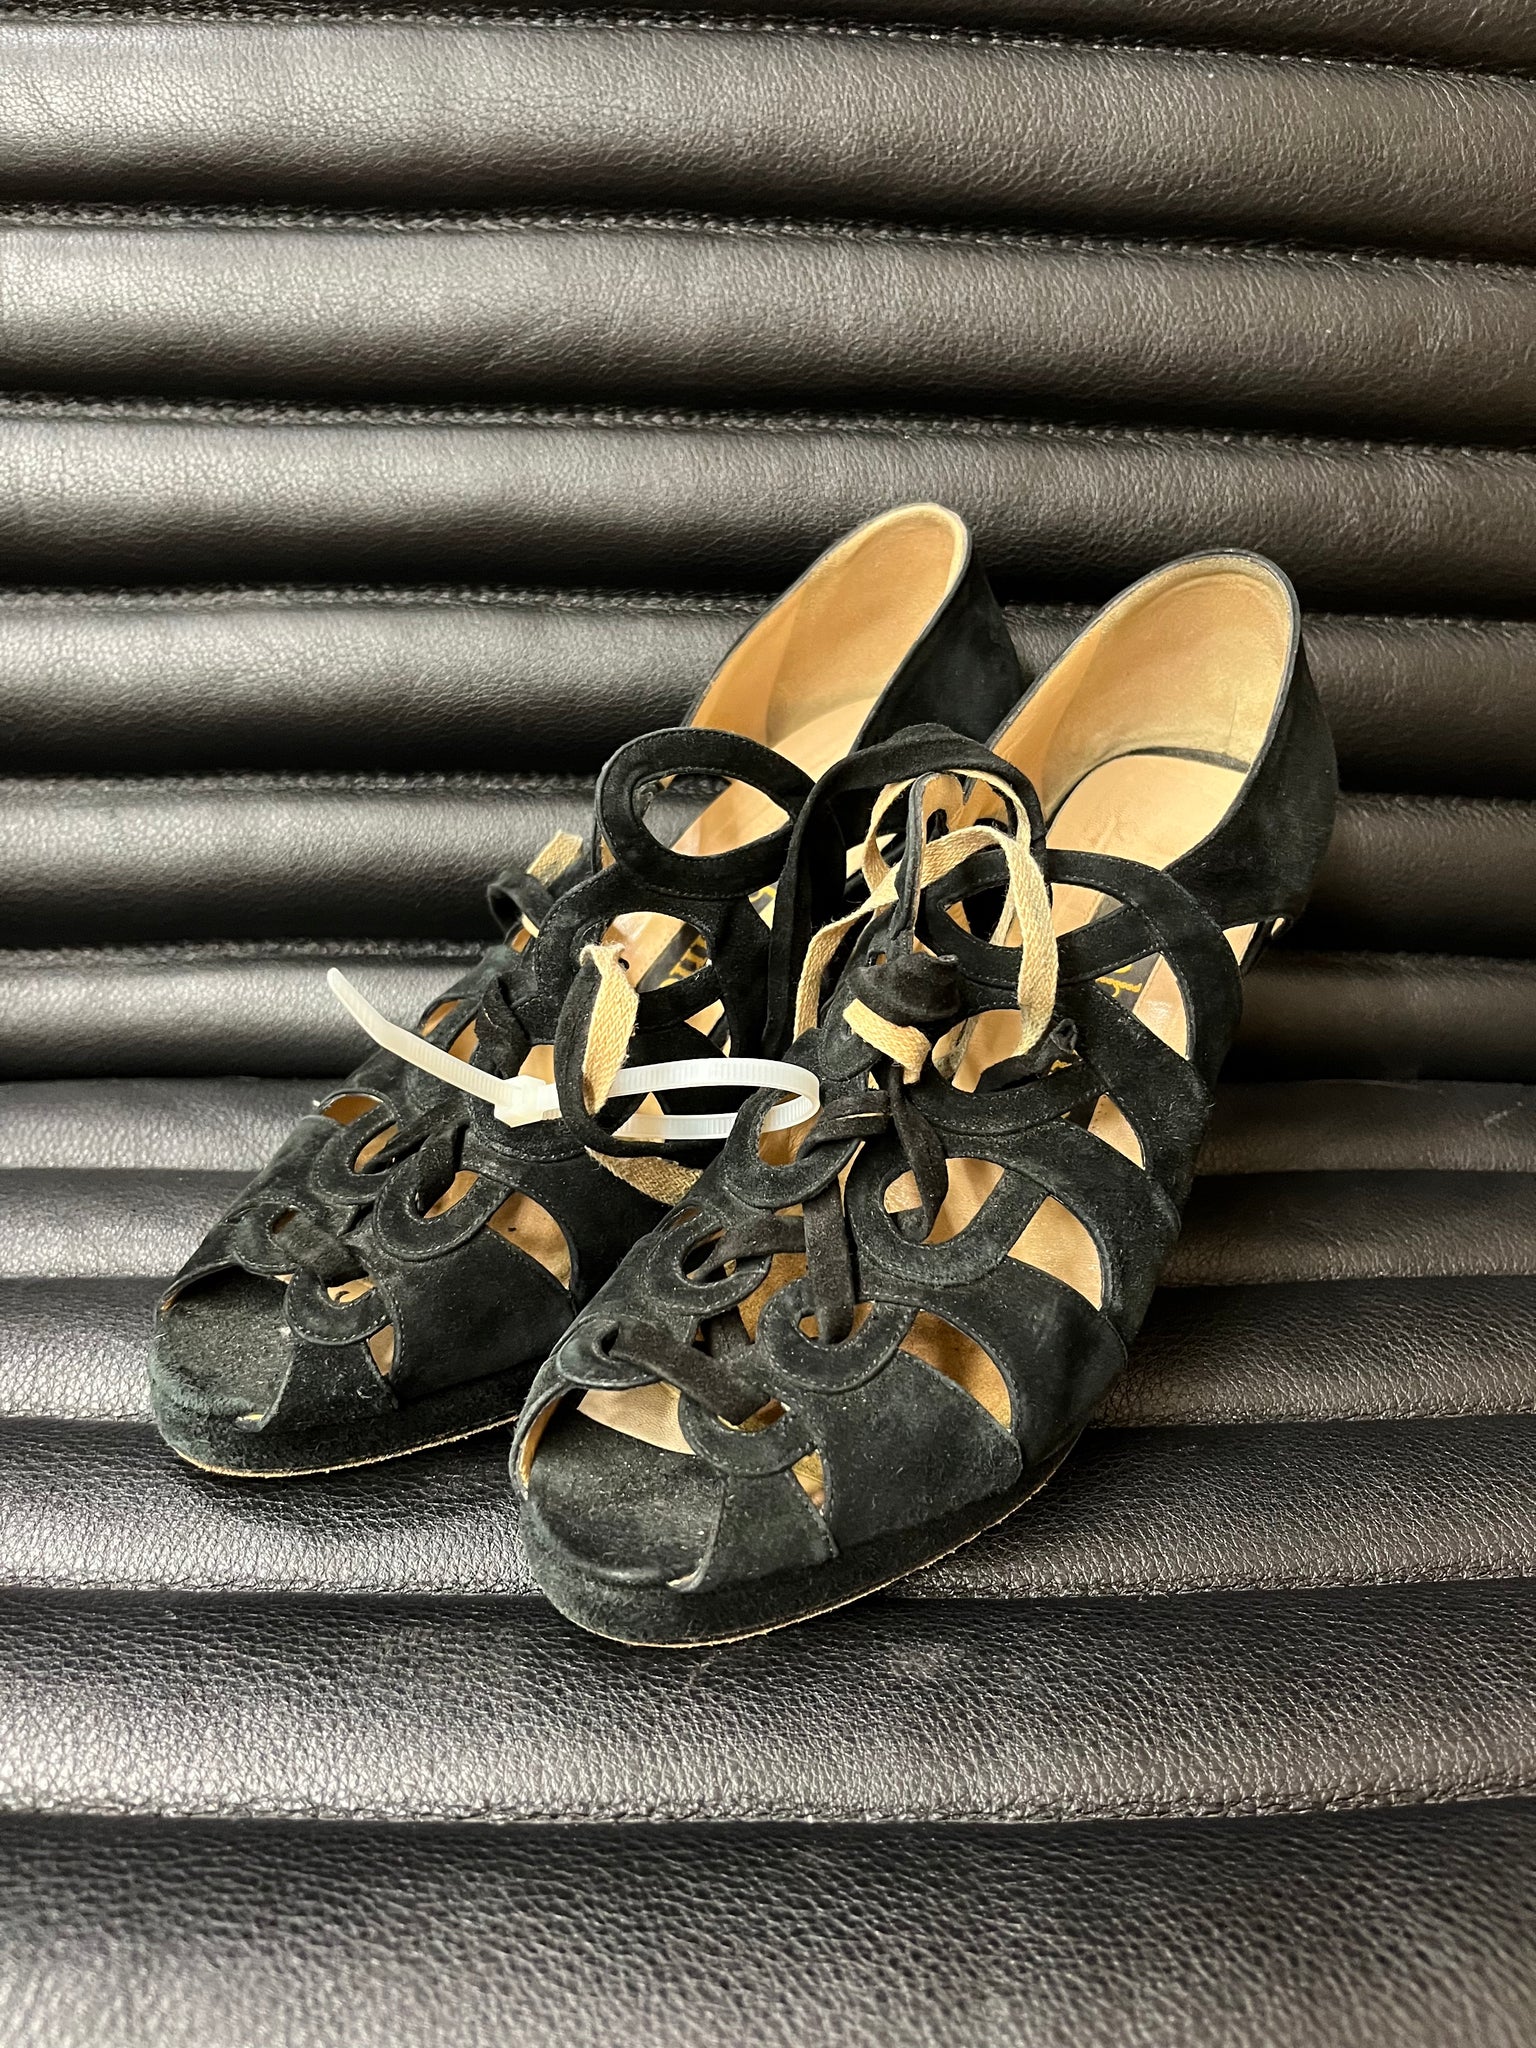 1990s SHOES- Ombeline suede cutout strappy